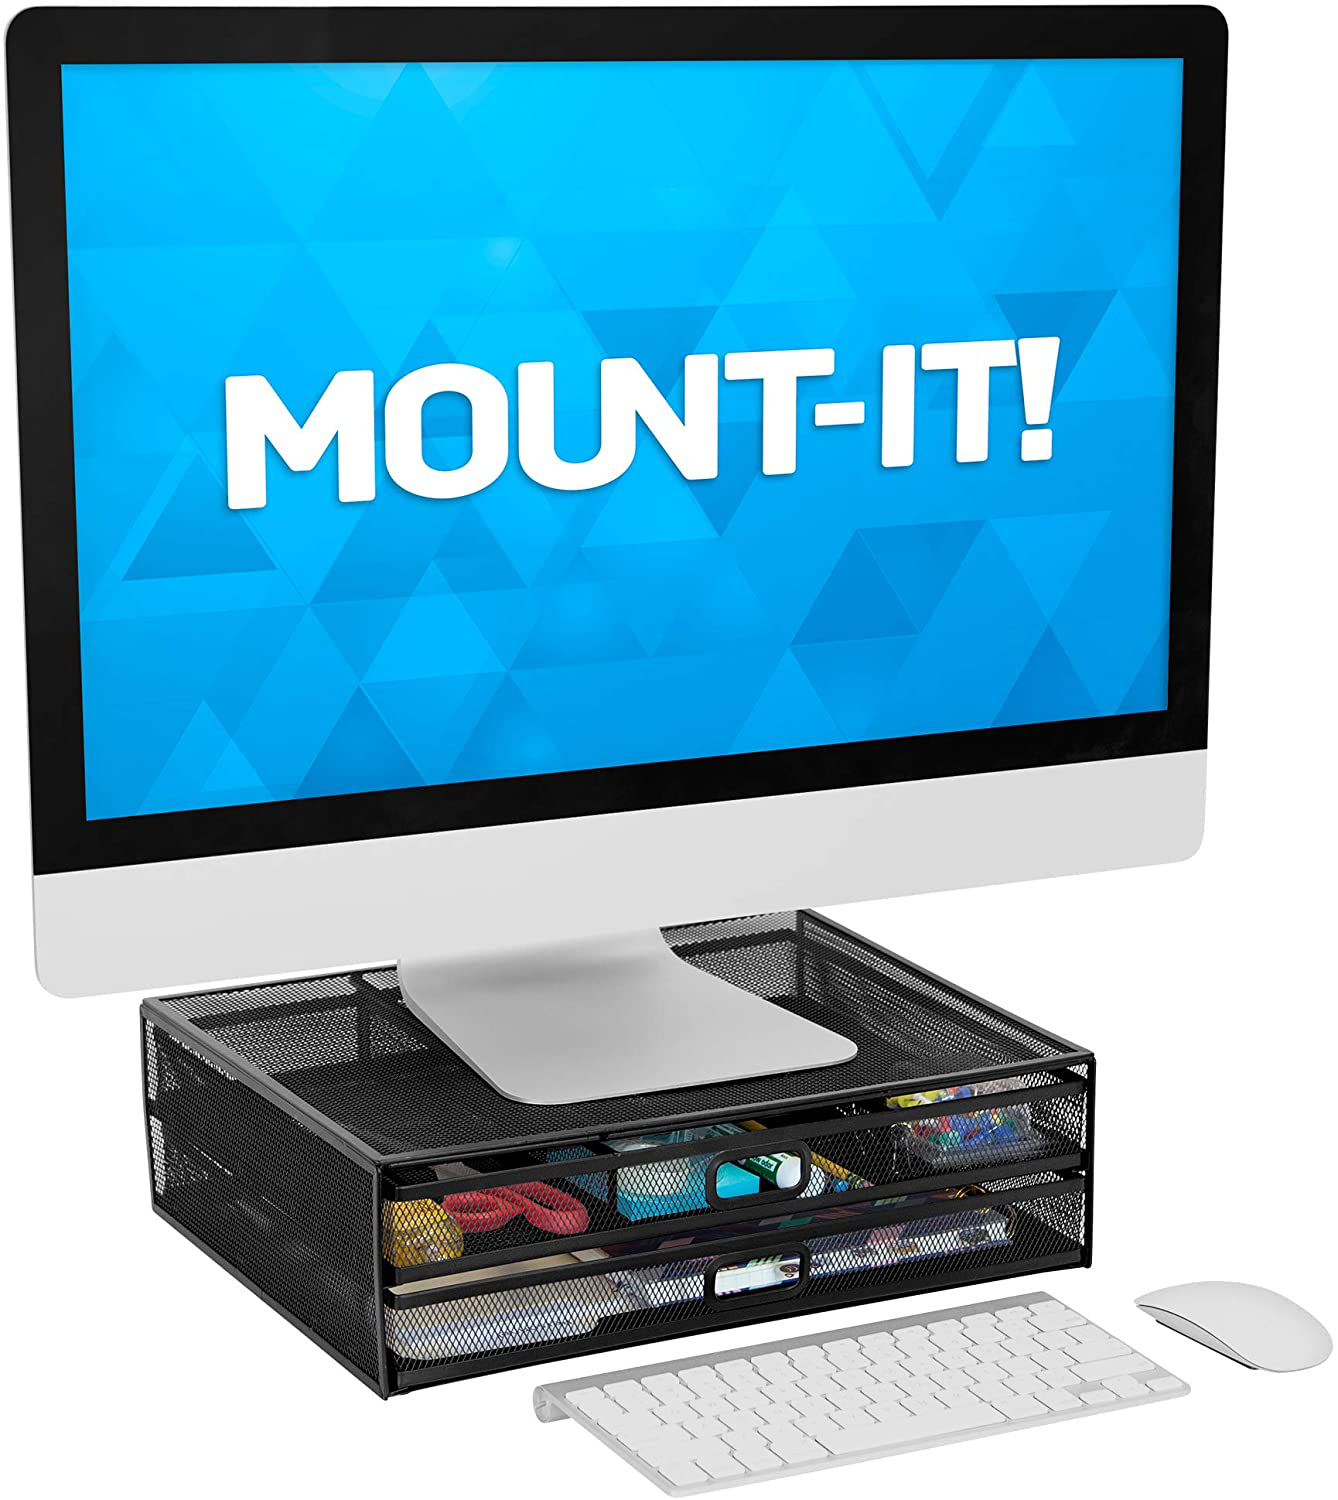 MOUNT-IT! Mesh Computer Monitor Stand Riser [Metal] Desk Organizer with Two Pullout Storage Drawers for Desktop, Laptop, and Printer Accessories and Office Supplies (Black)